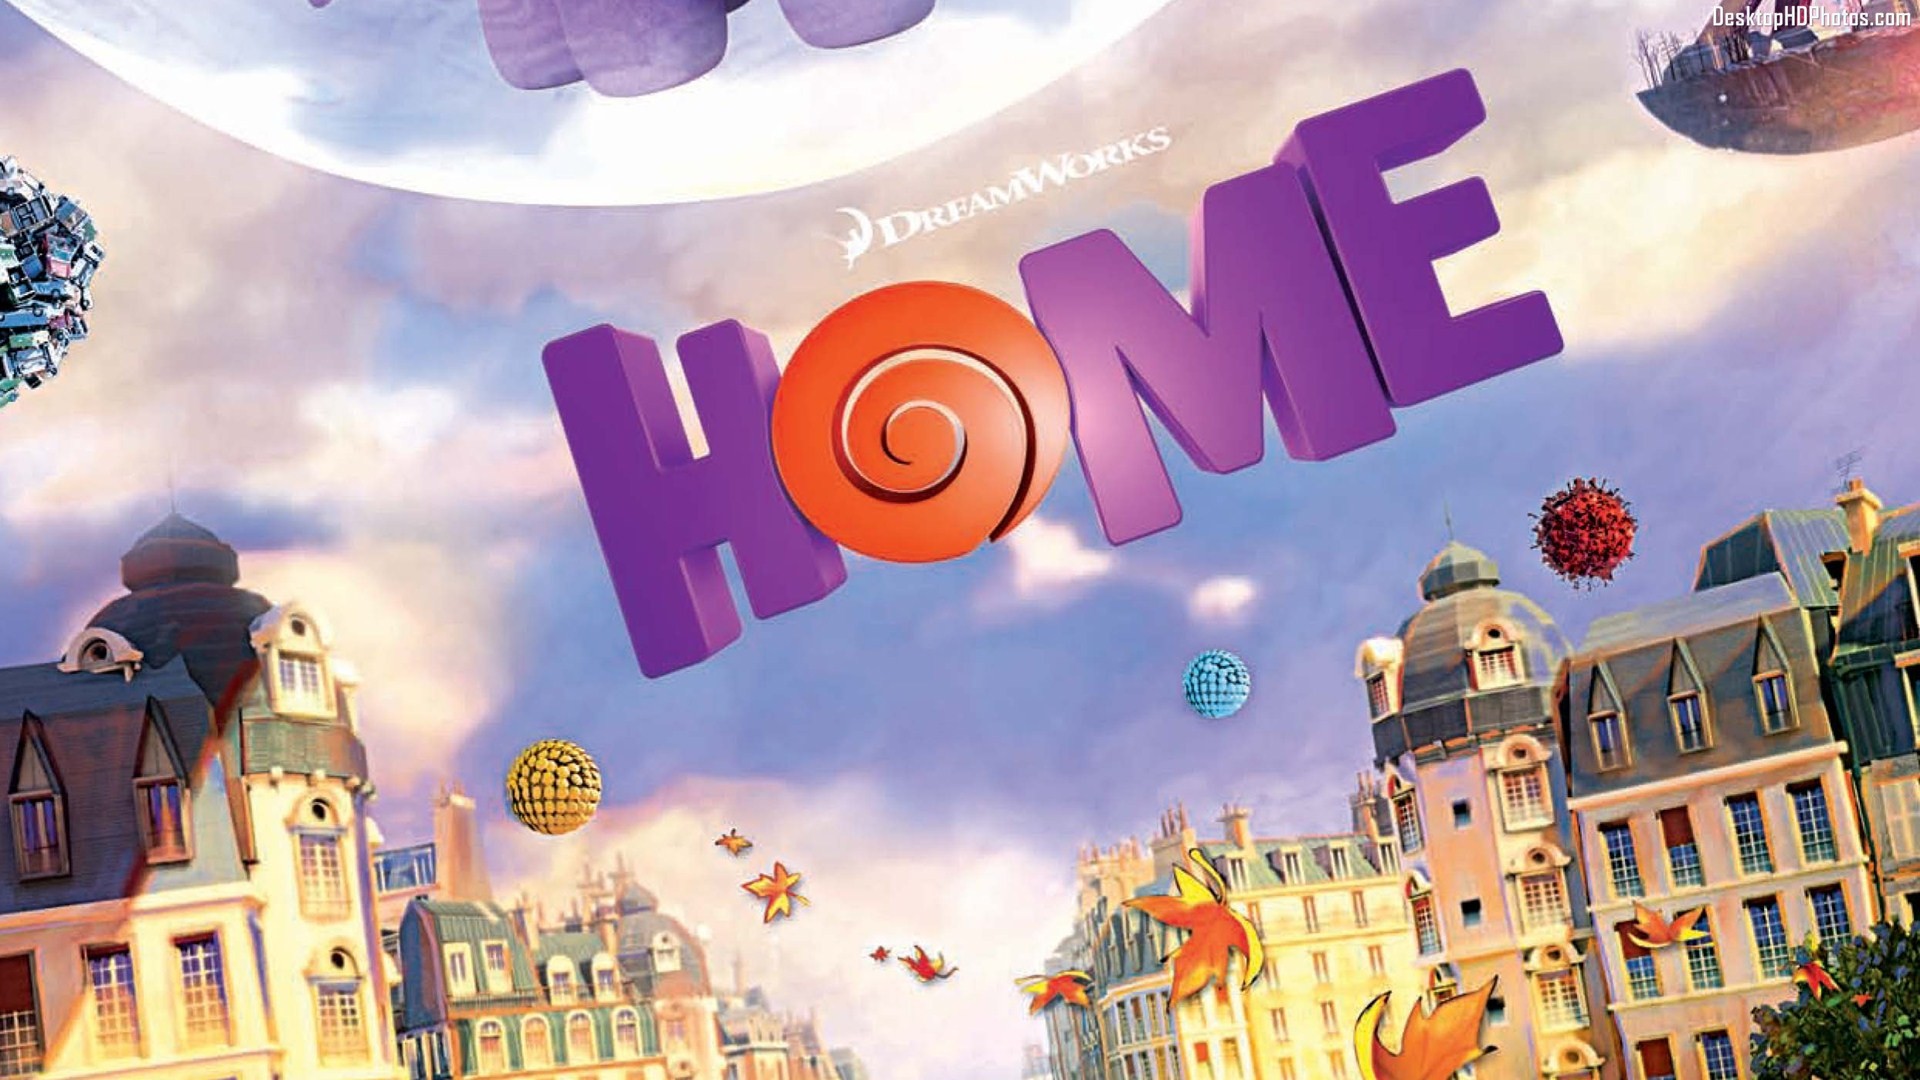 Home (2015) Wallpapers